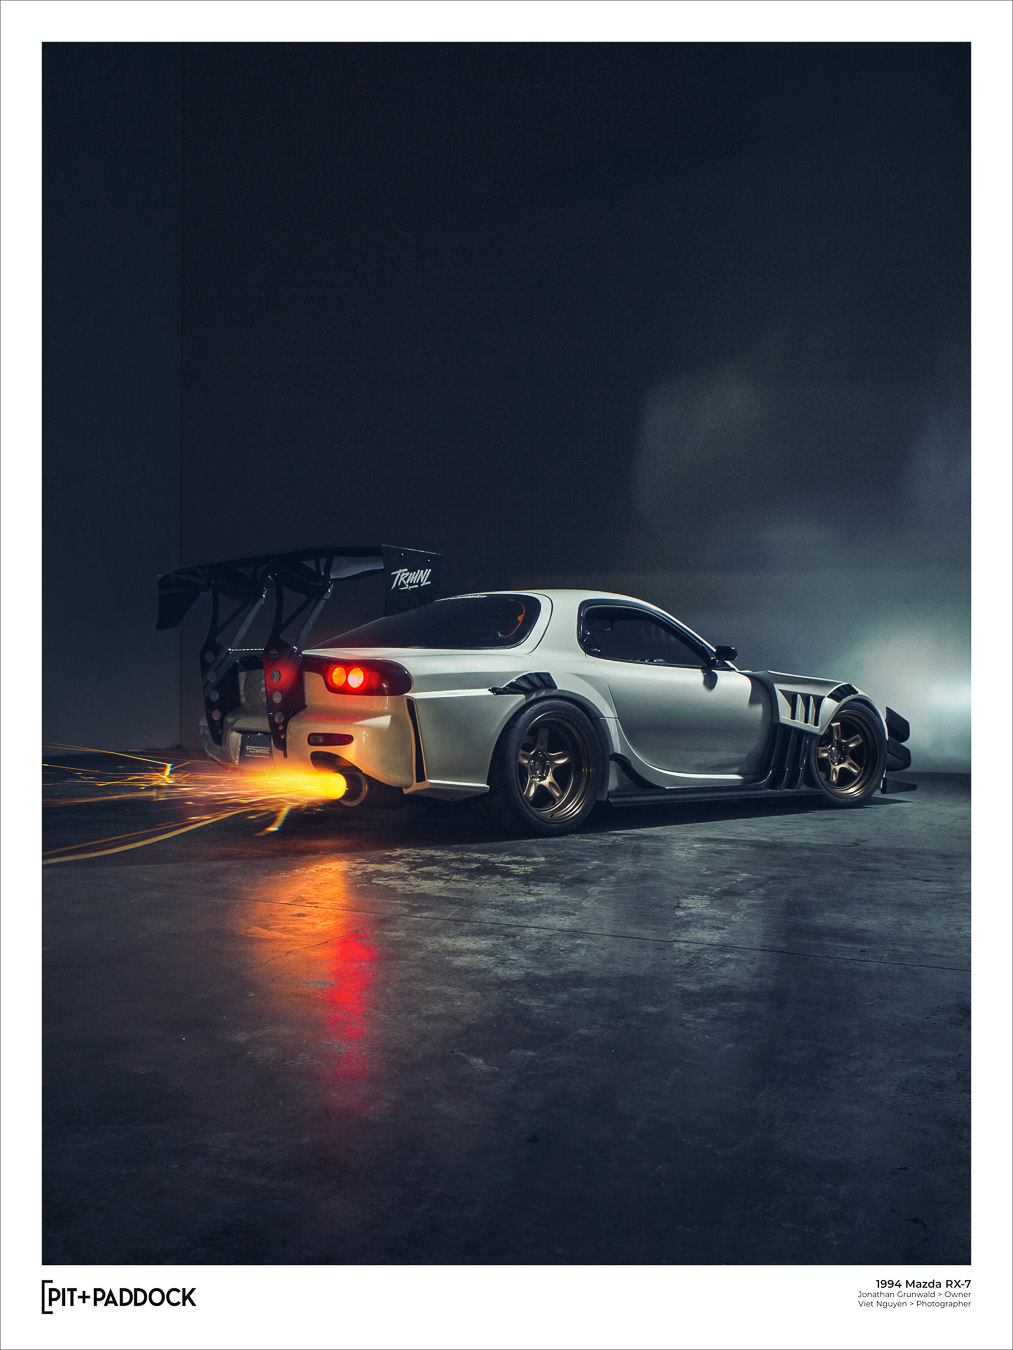 Mazda RX-7 With 700hp 13B-REW Shoots Flames For Inaugural Poster Shoot